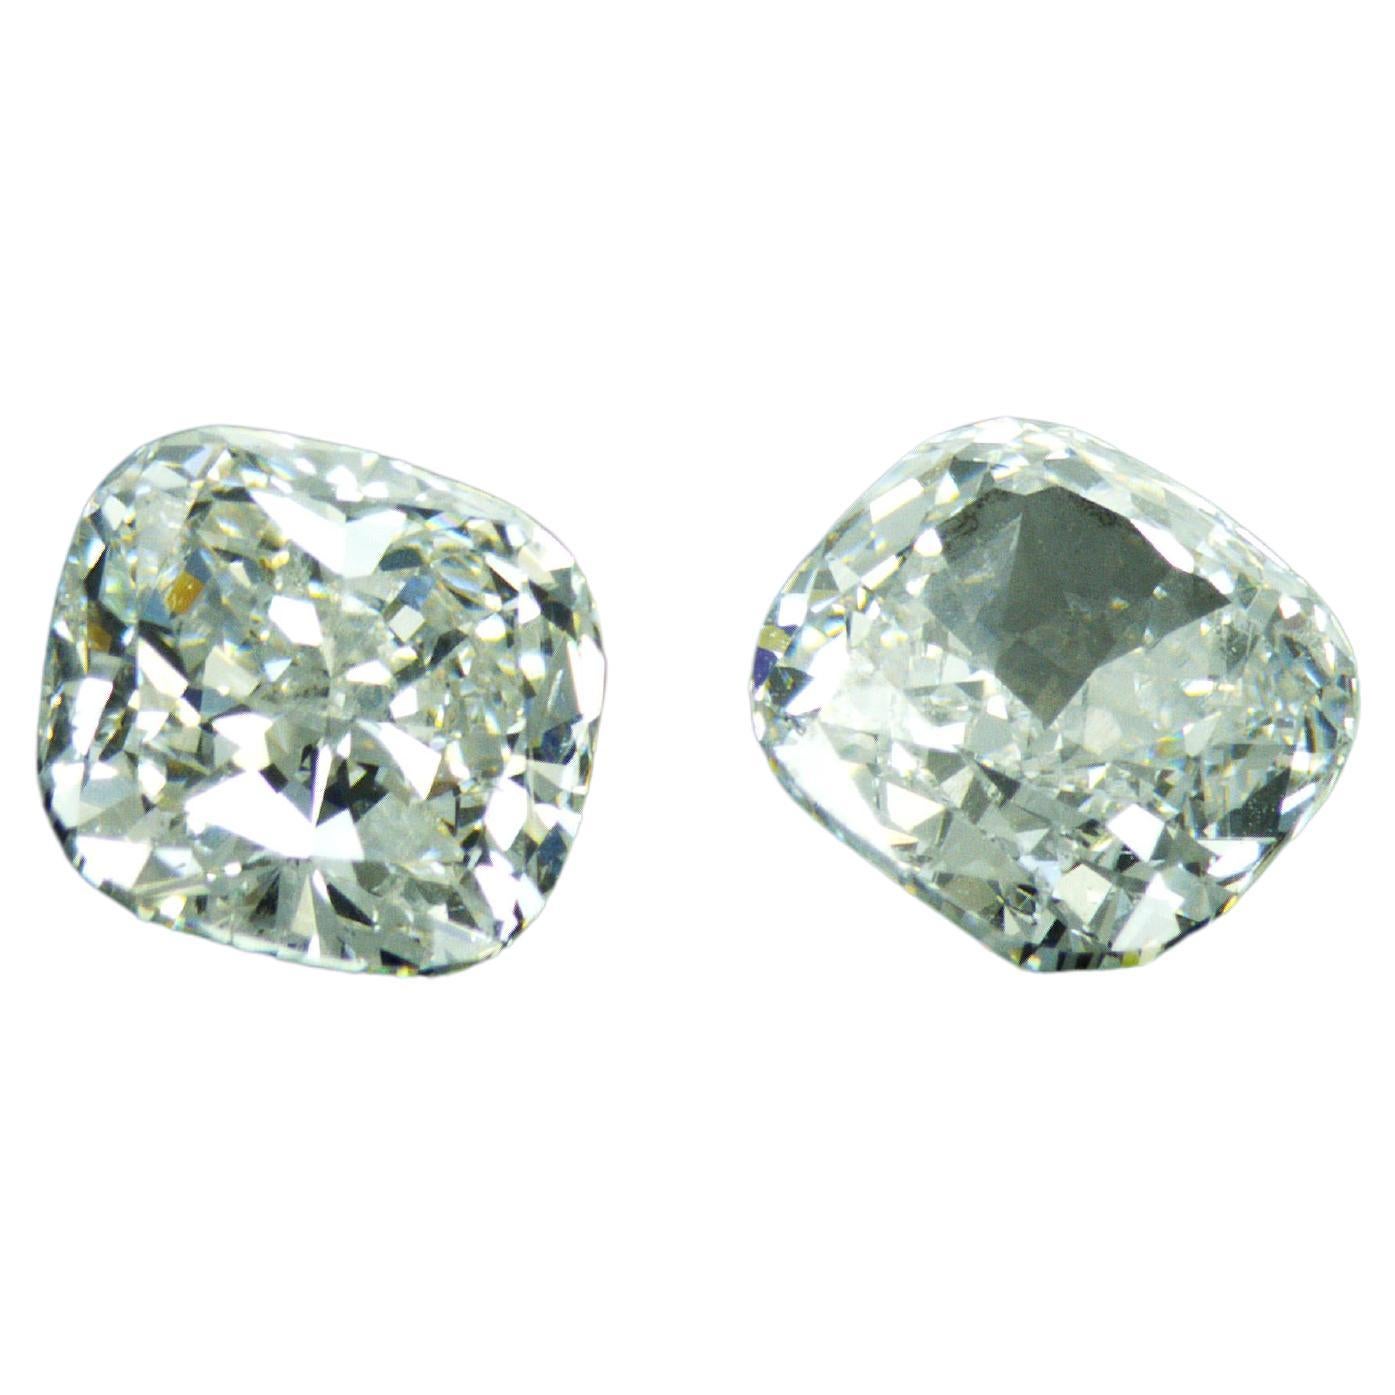 HRDAntwerp certified 1.01 and 1.03 carat Cushion Shape Pair of Natural Diamond For Sale